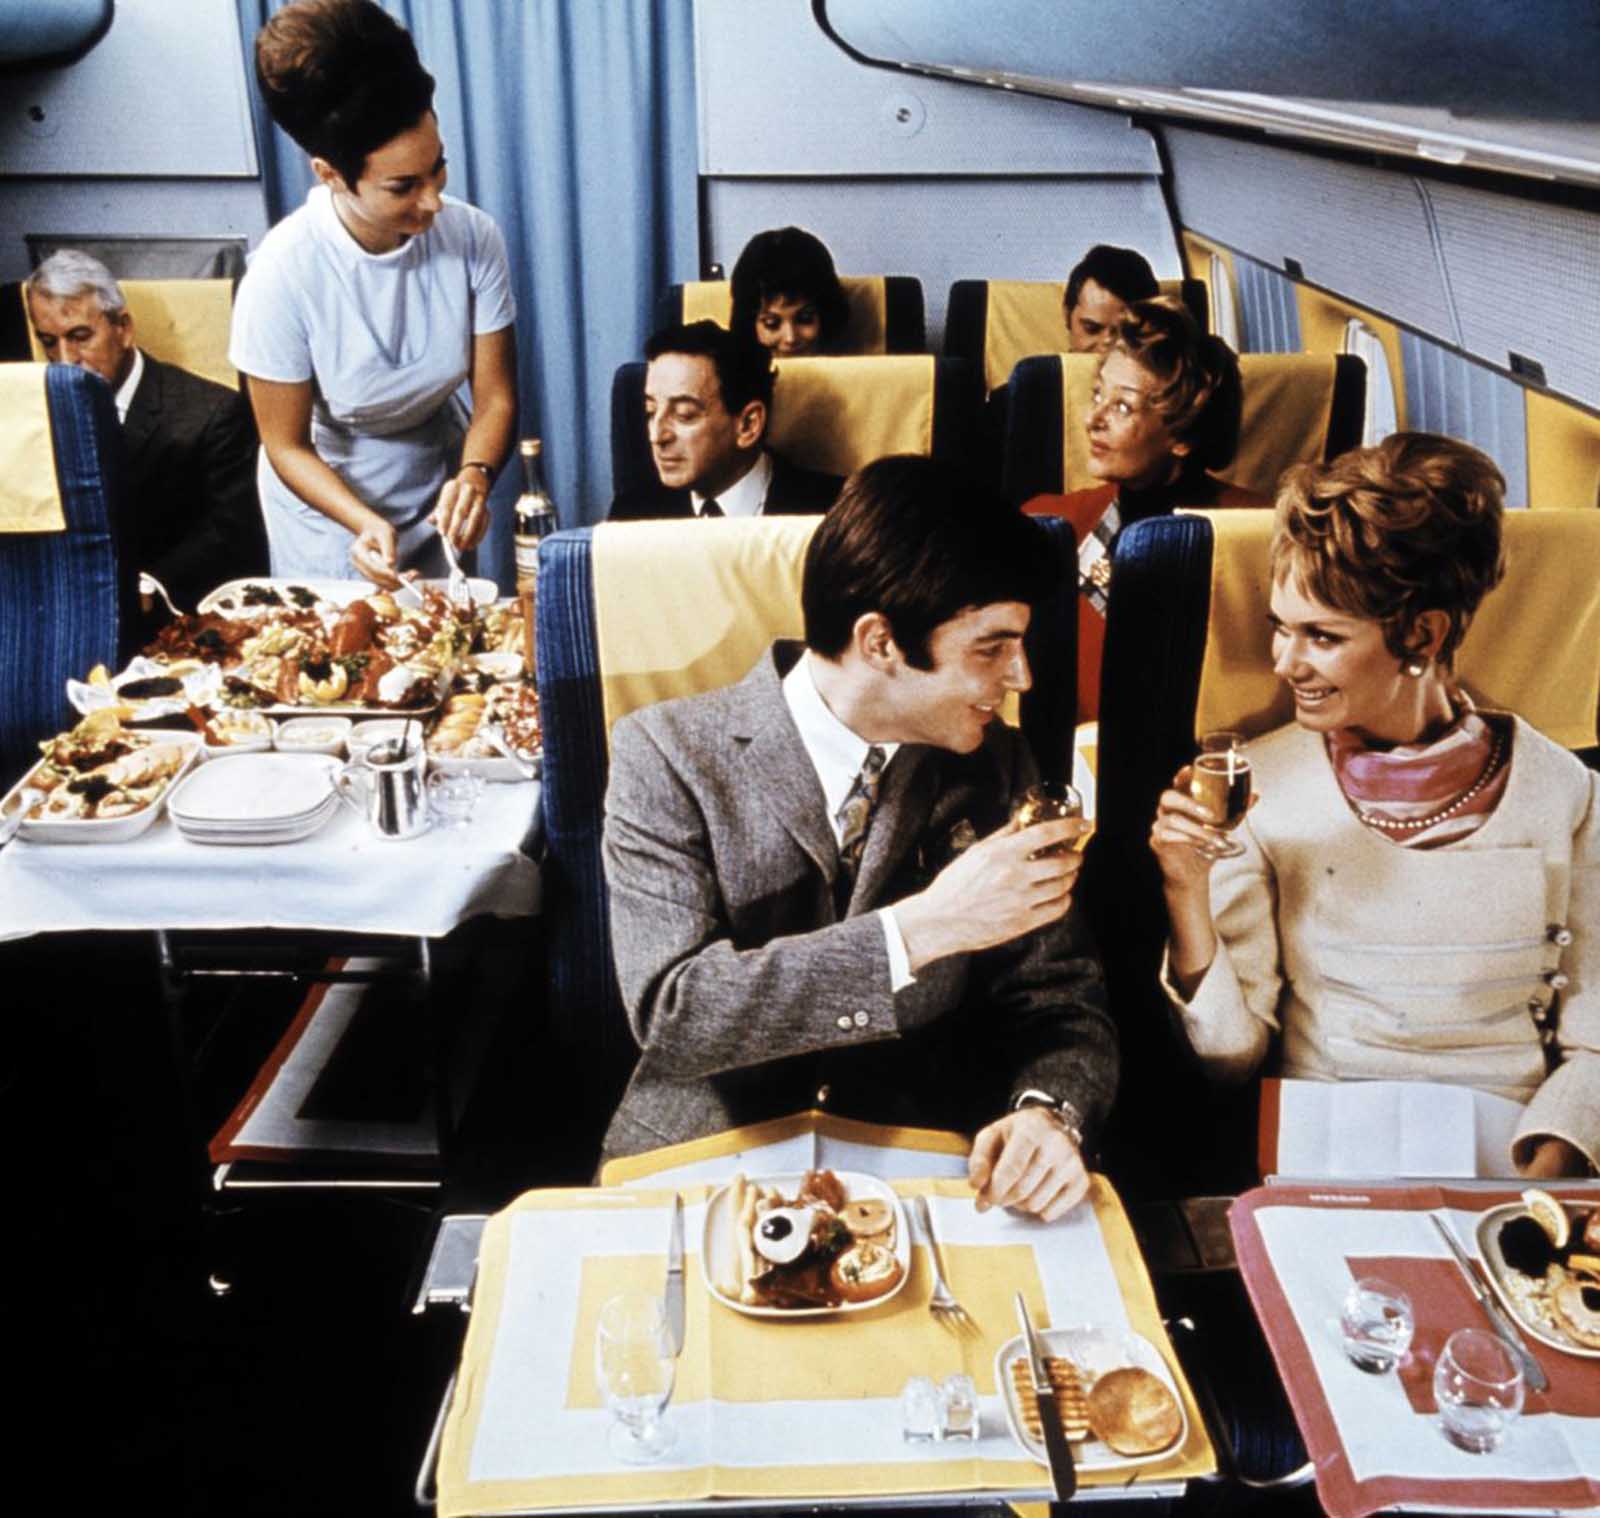 there was a wide variety of food selections offered by these airliners